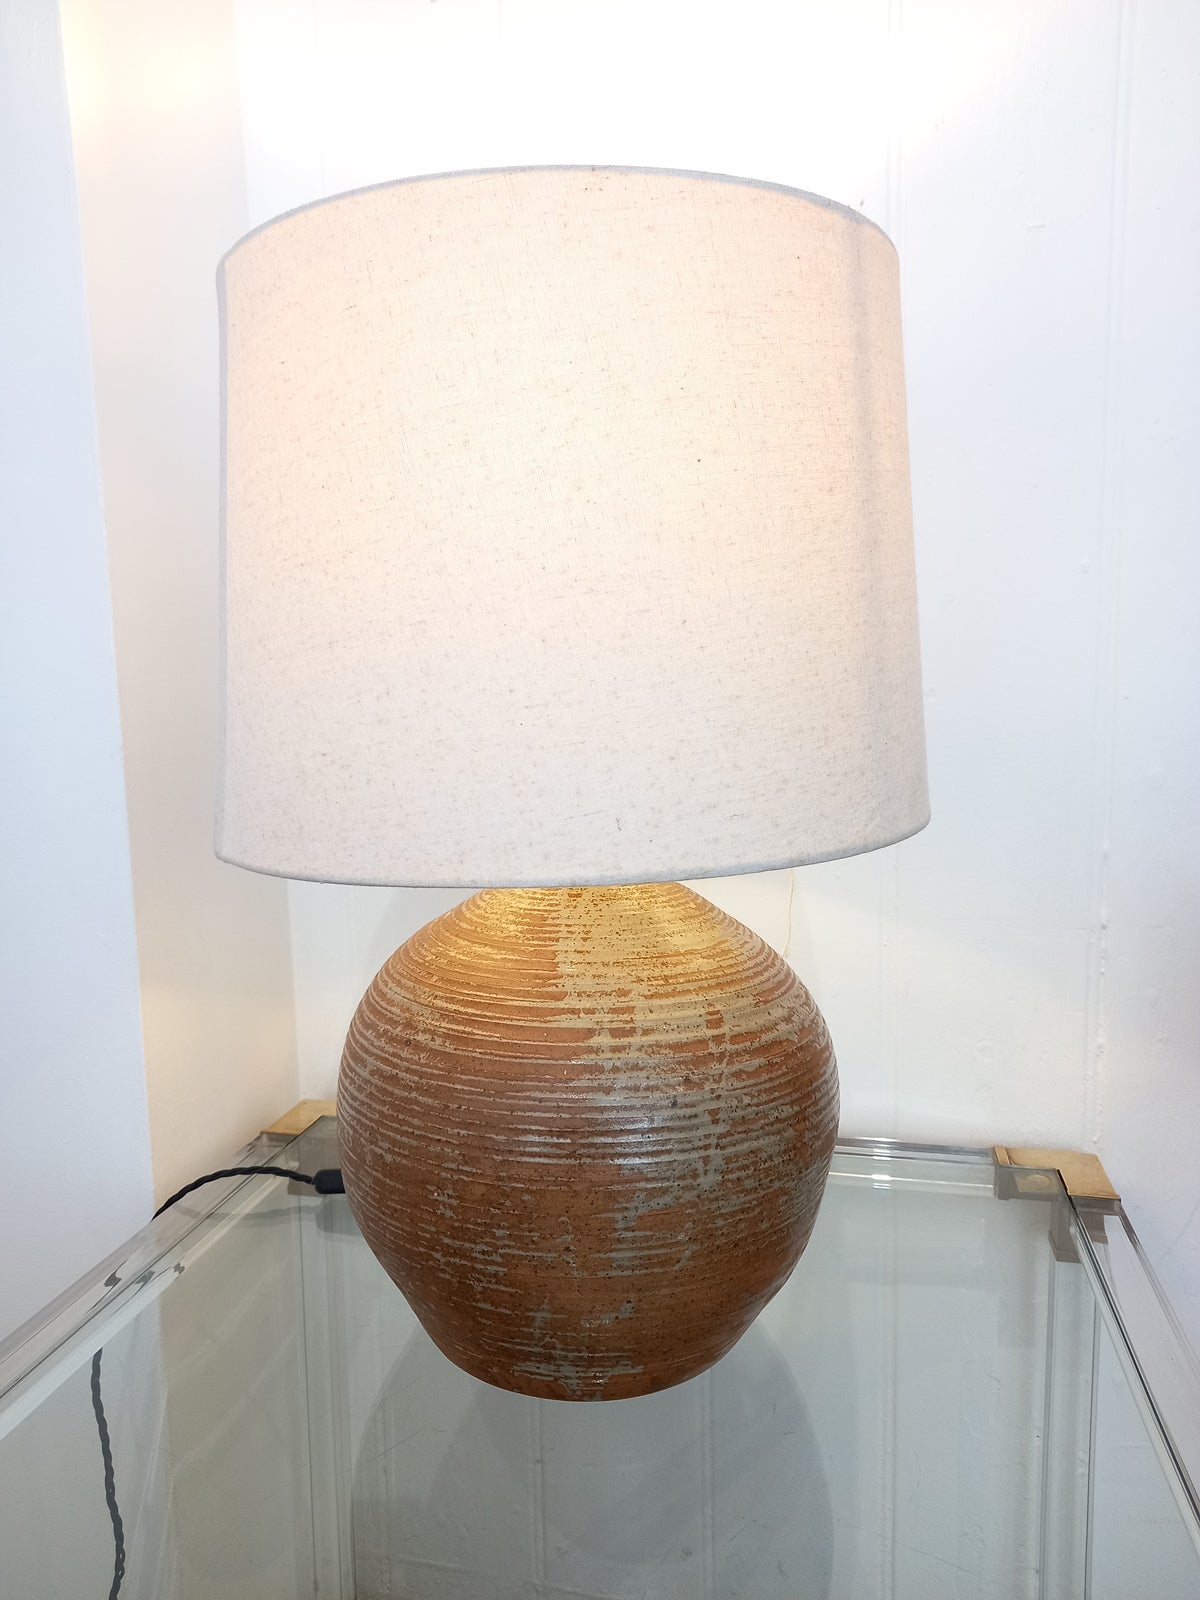 Earthenware ceramic table lamp, 1970s
Earthenware ceramic table lamp, with earthy speckled brown glaze. French, circa 1970s. Shade not supplied.

​Rewired for the UK. Can be rewired for any country. 

Dimensions: H 45 x W 40 cm

​